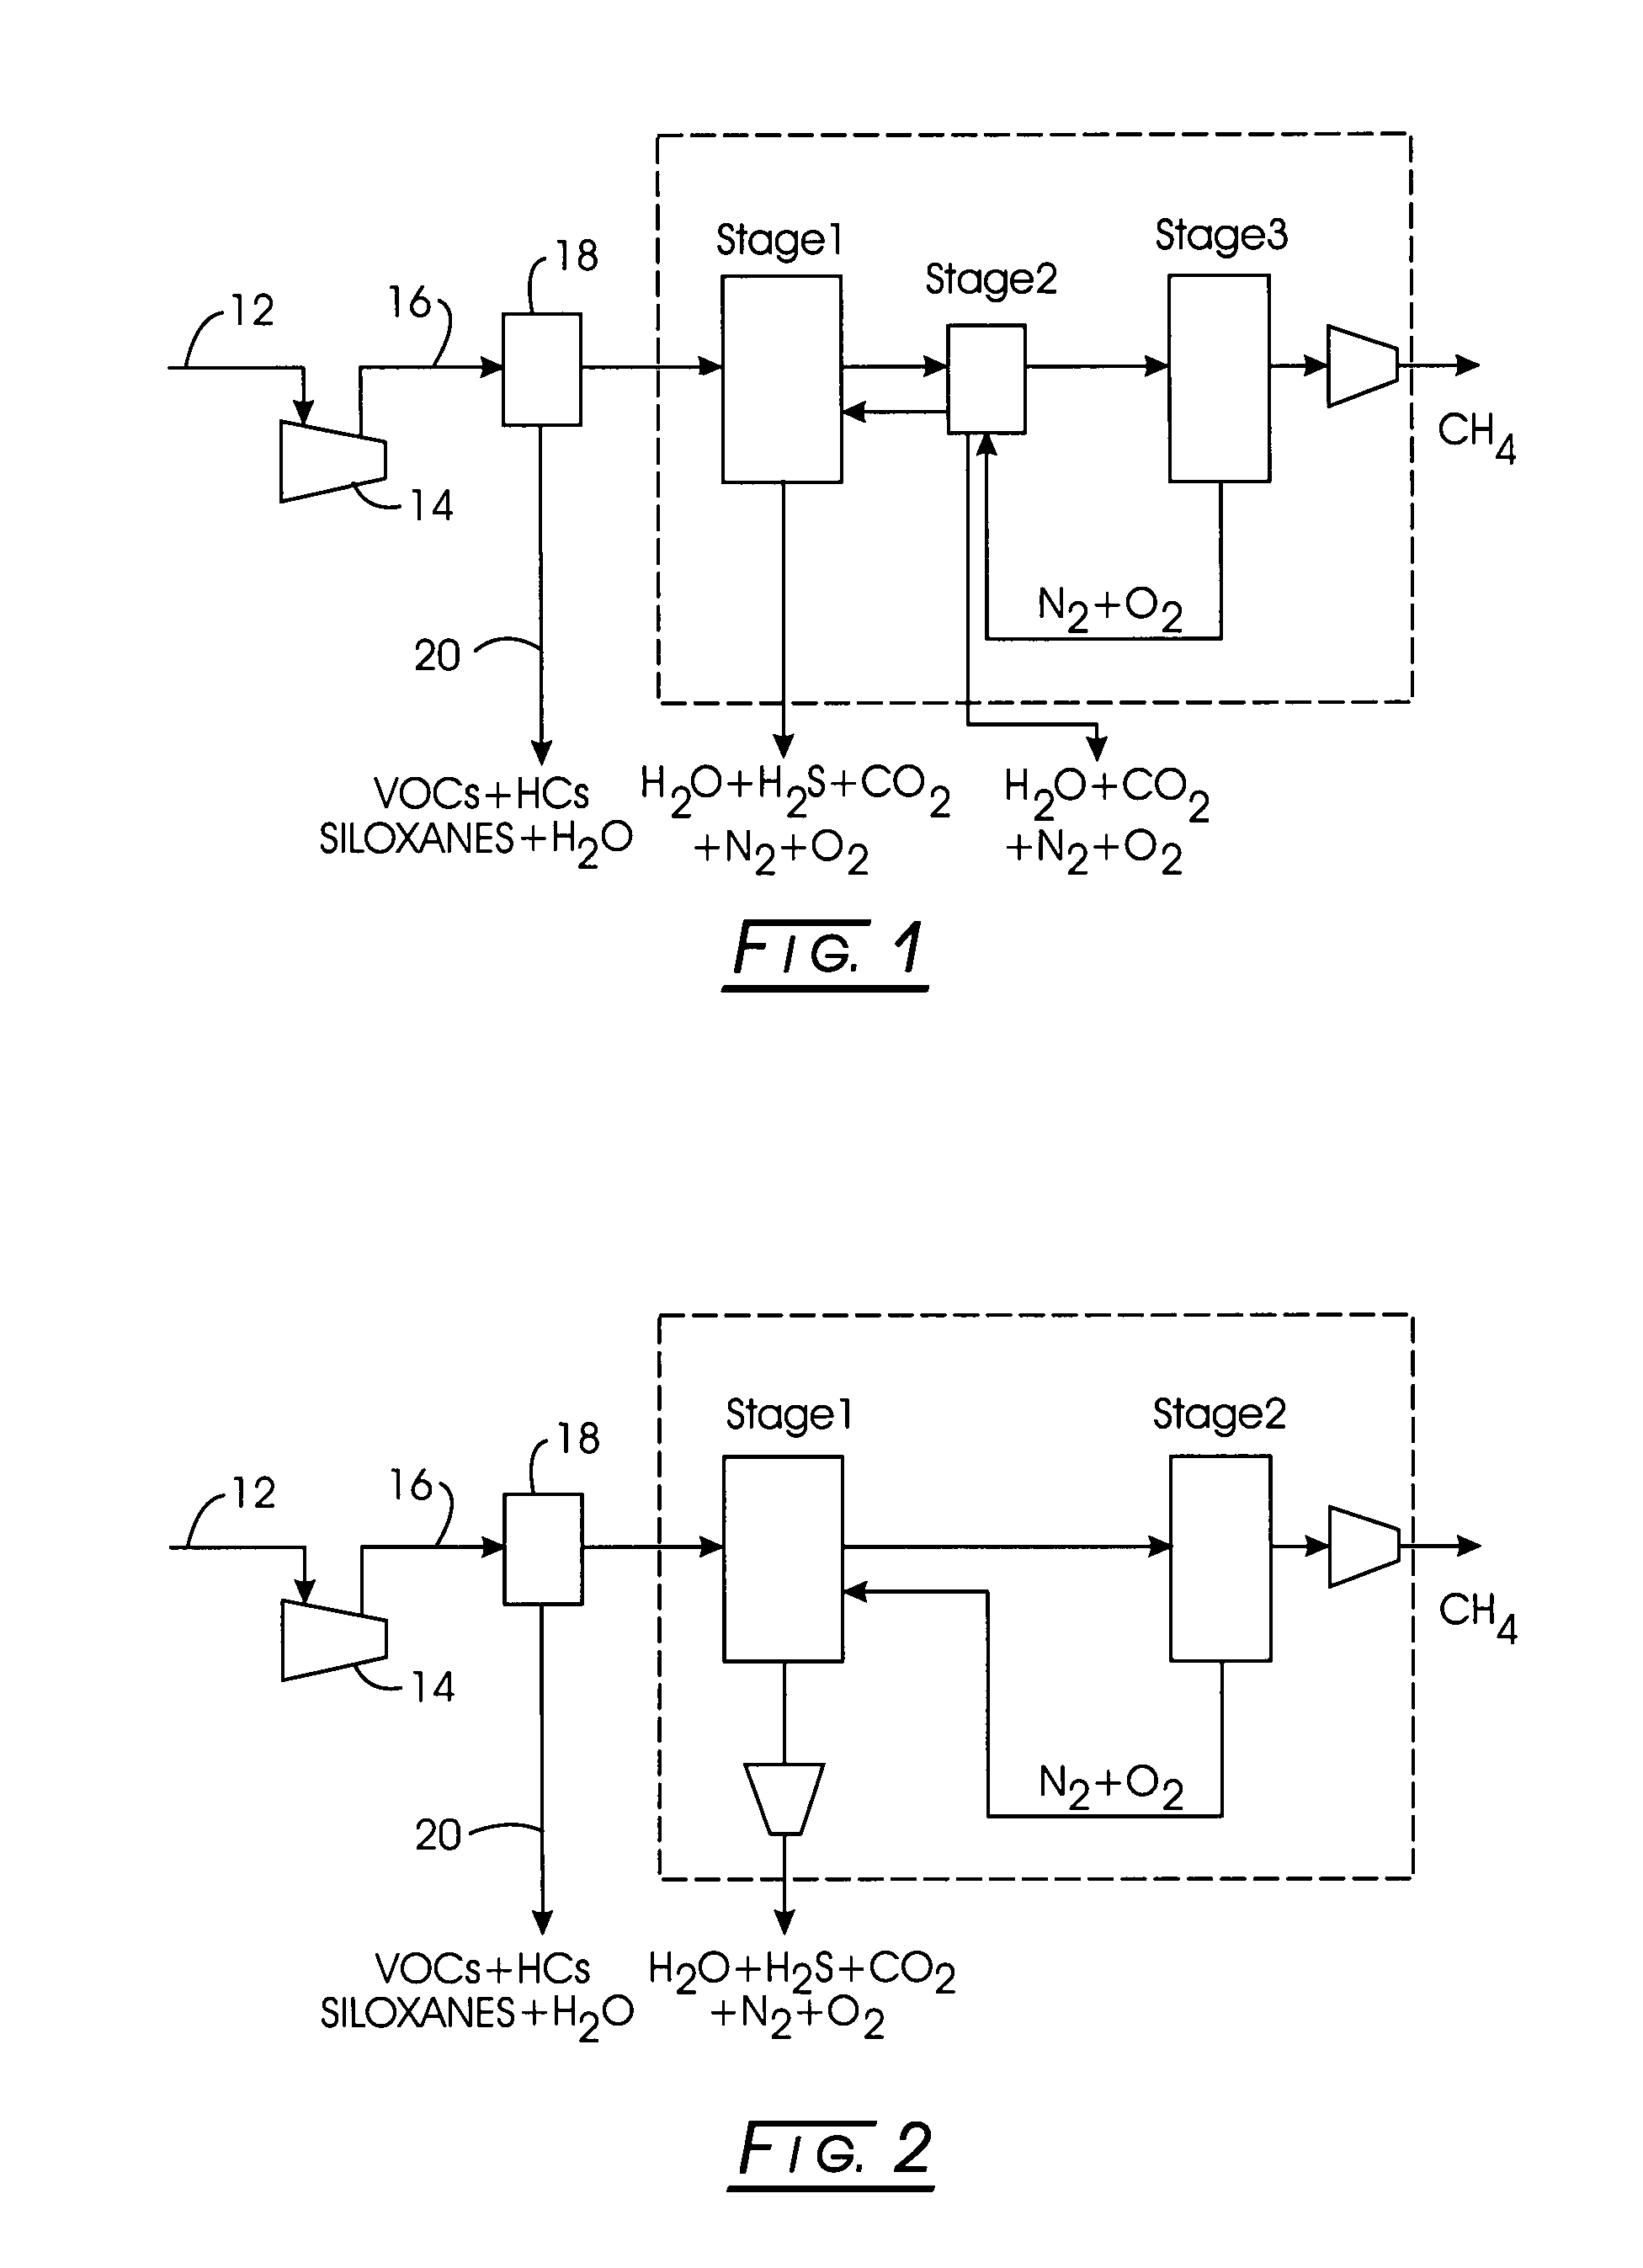 Multi-stage adsorption system for gas mixture separation